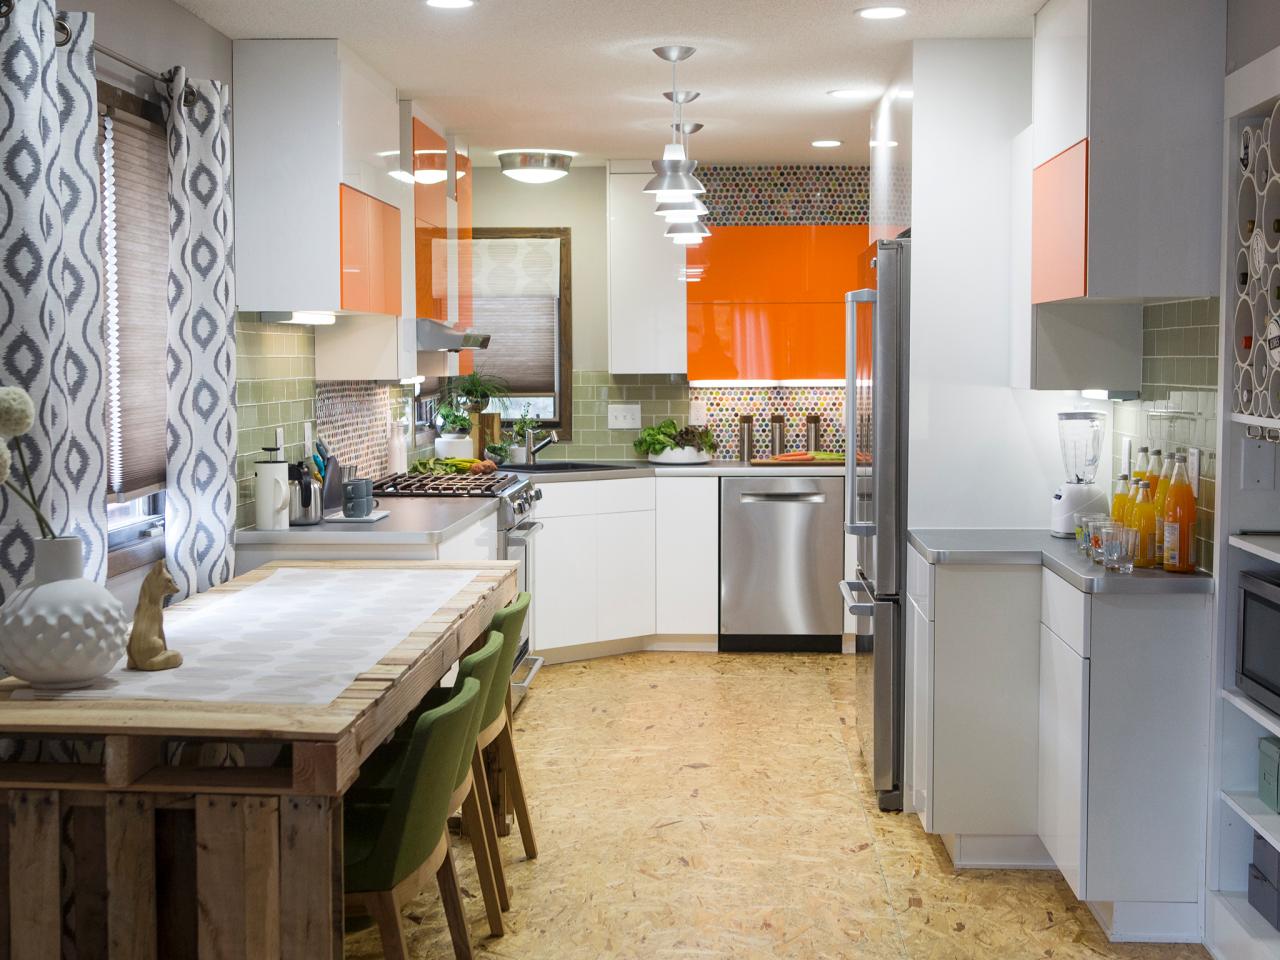 How to Design a Kitchen on a Budget   DIY